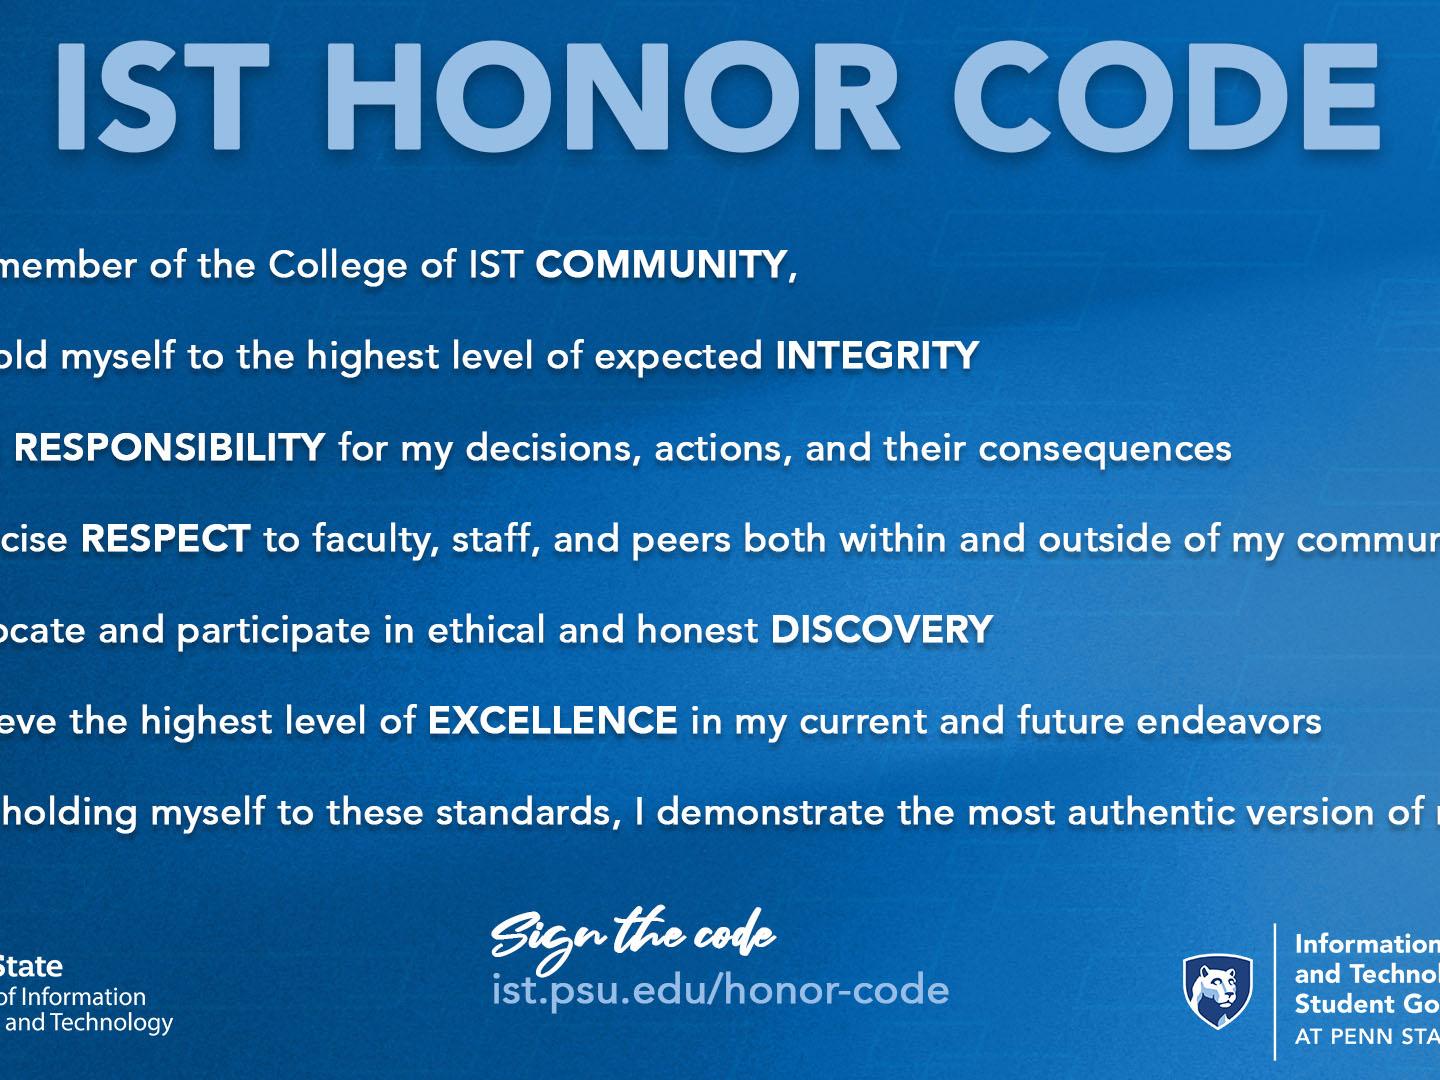 Honor code established at College of IST